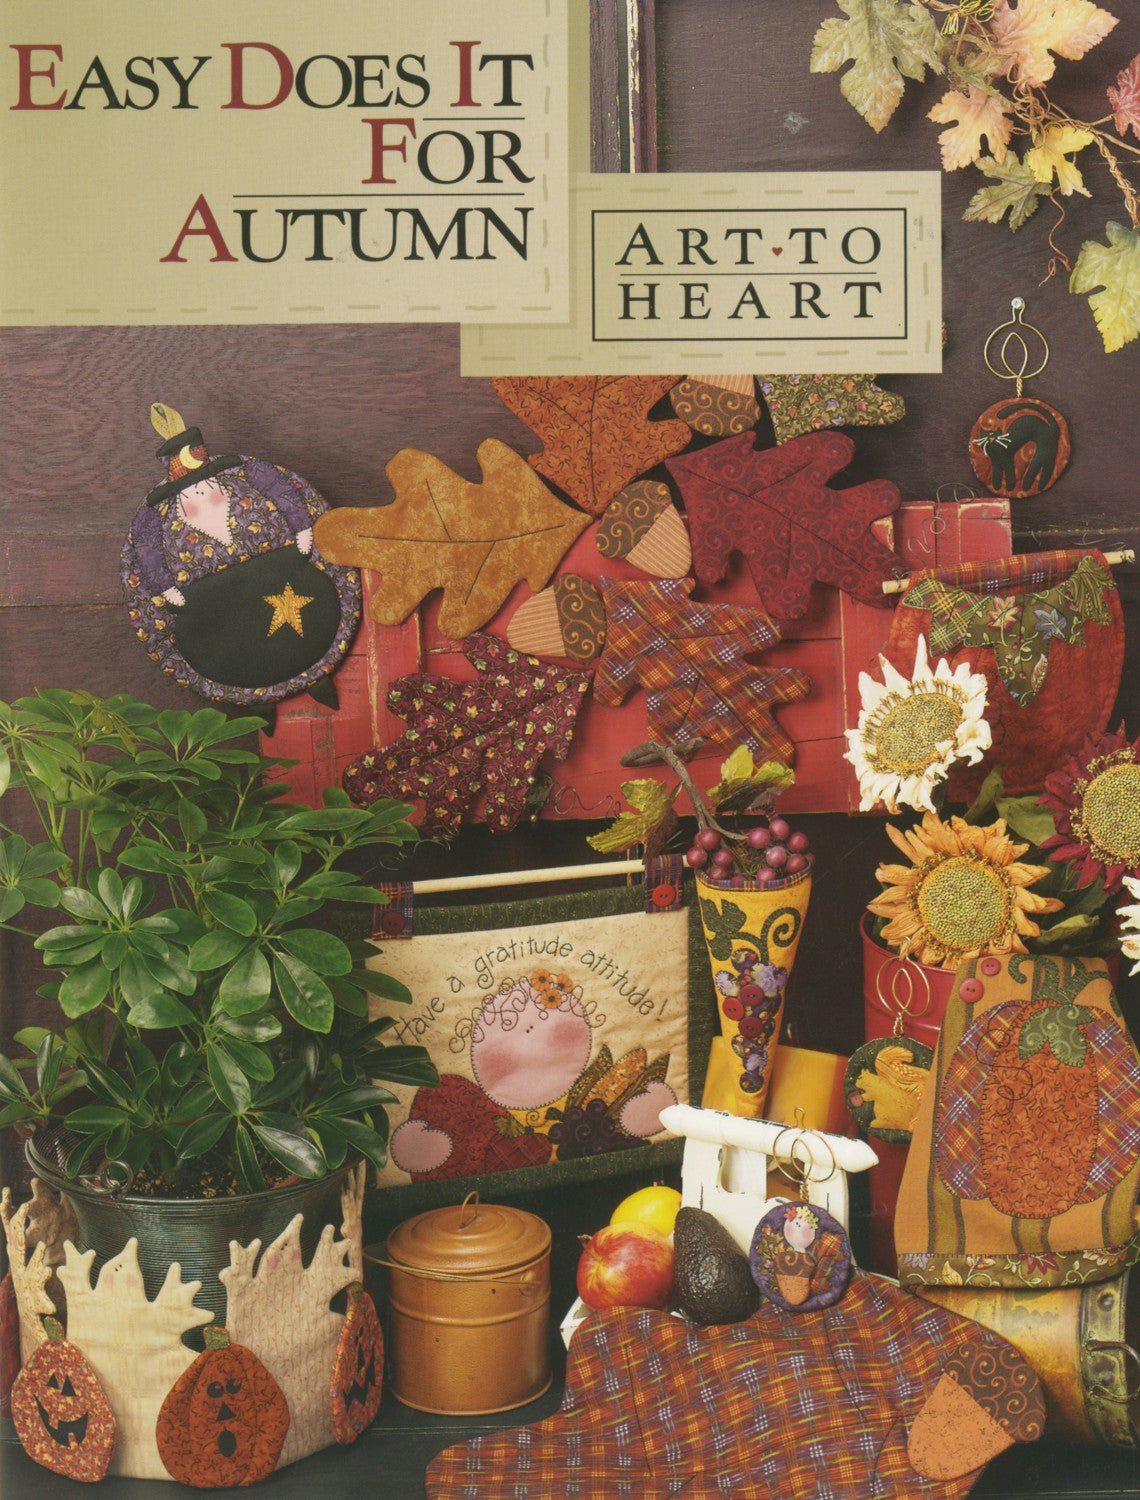 Easy Does it for Autumn - from Art to Heart by Nancy Halvorsen